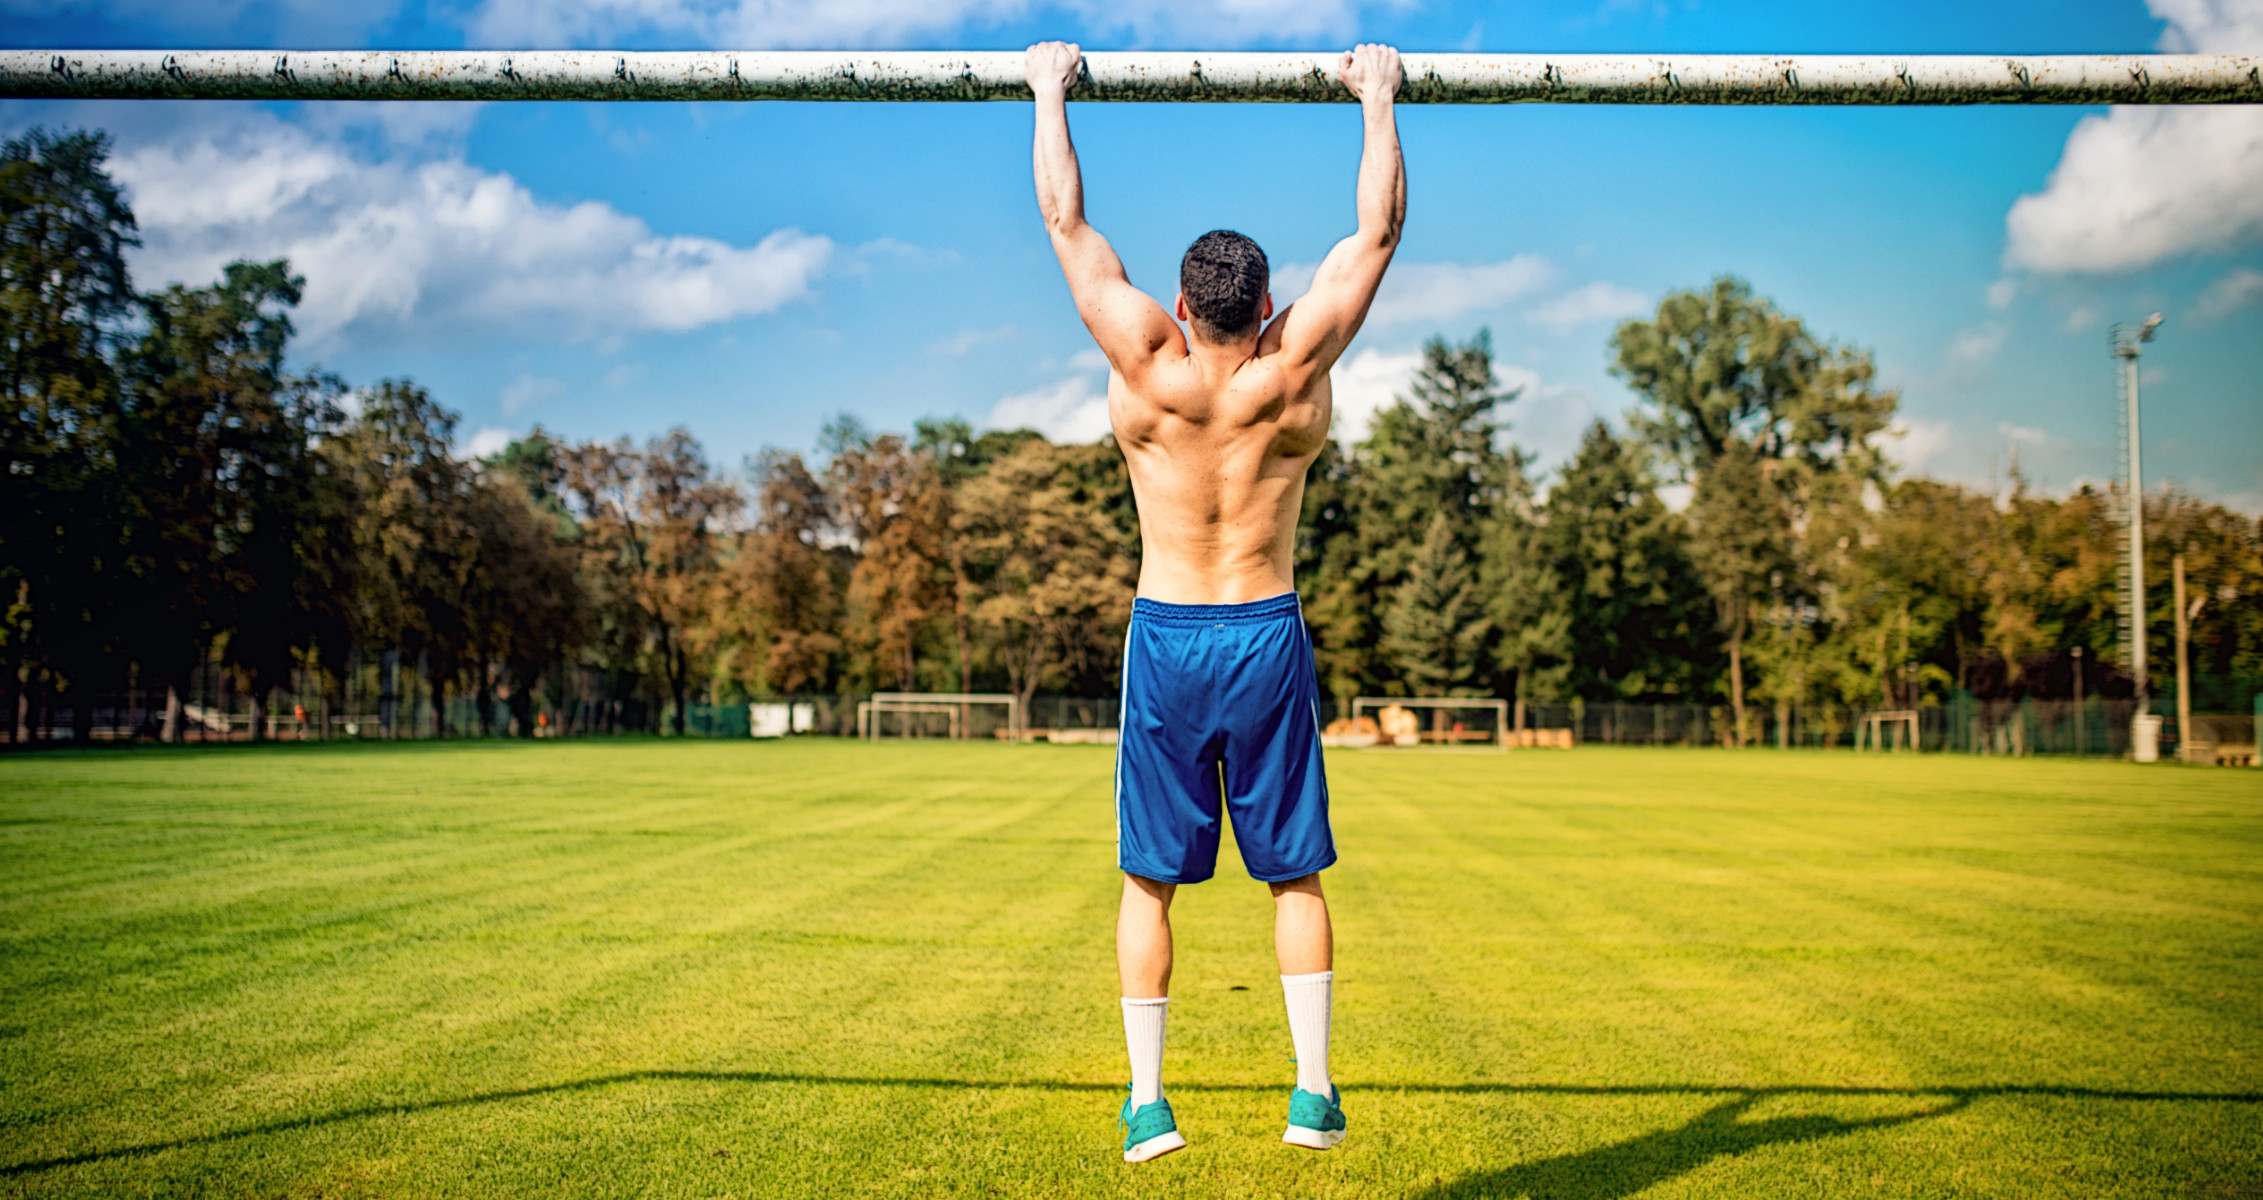 Build A Strong Back With These 8 Bodyweight Exercises